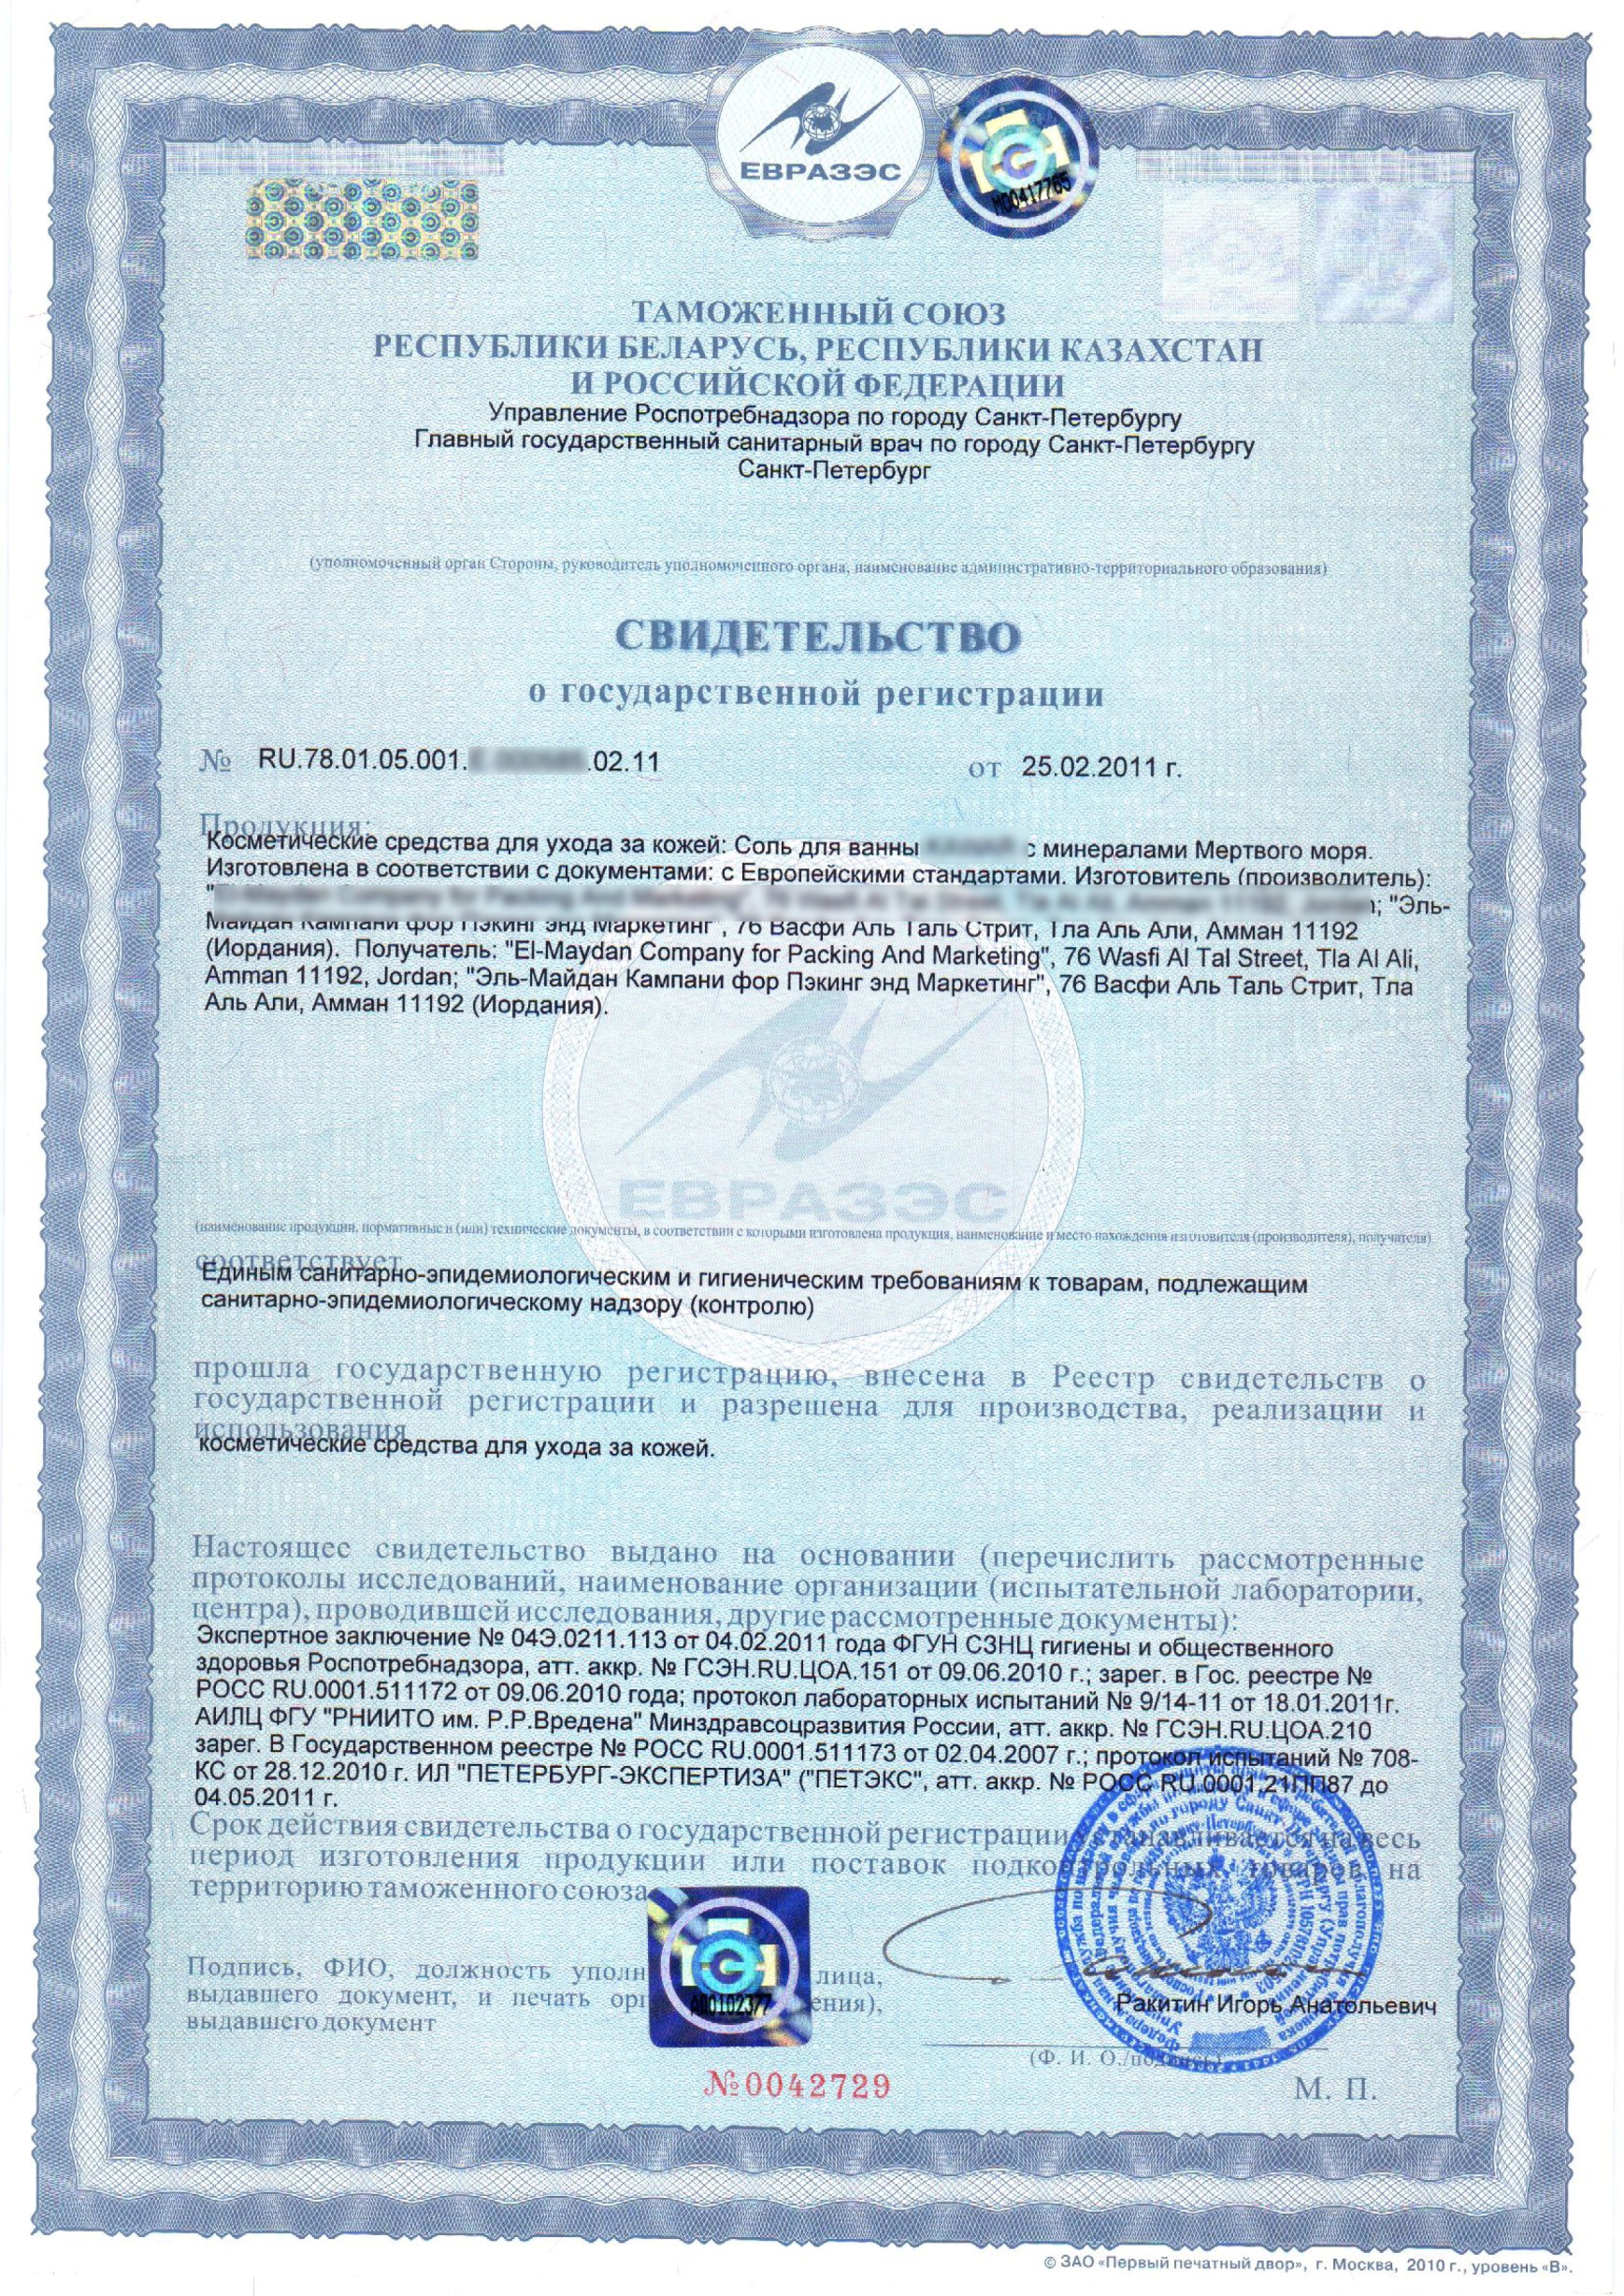 Customs Union Certificate of State Registration